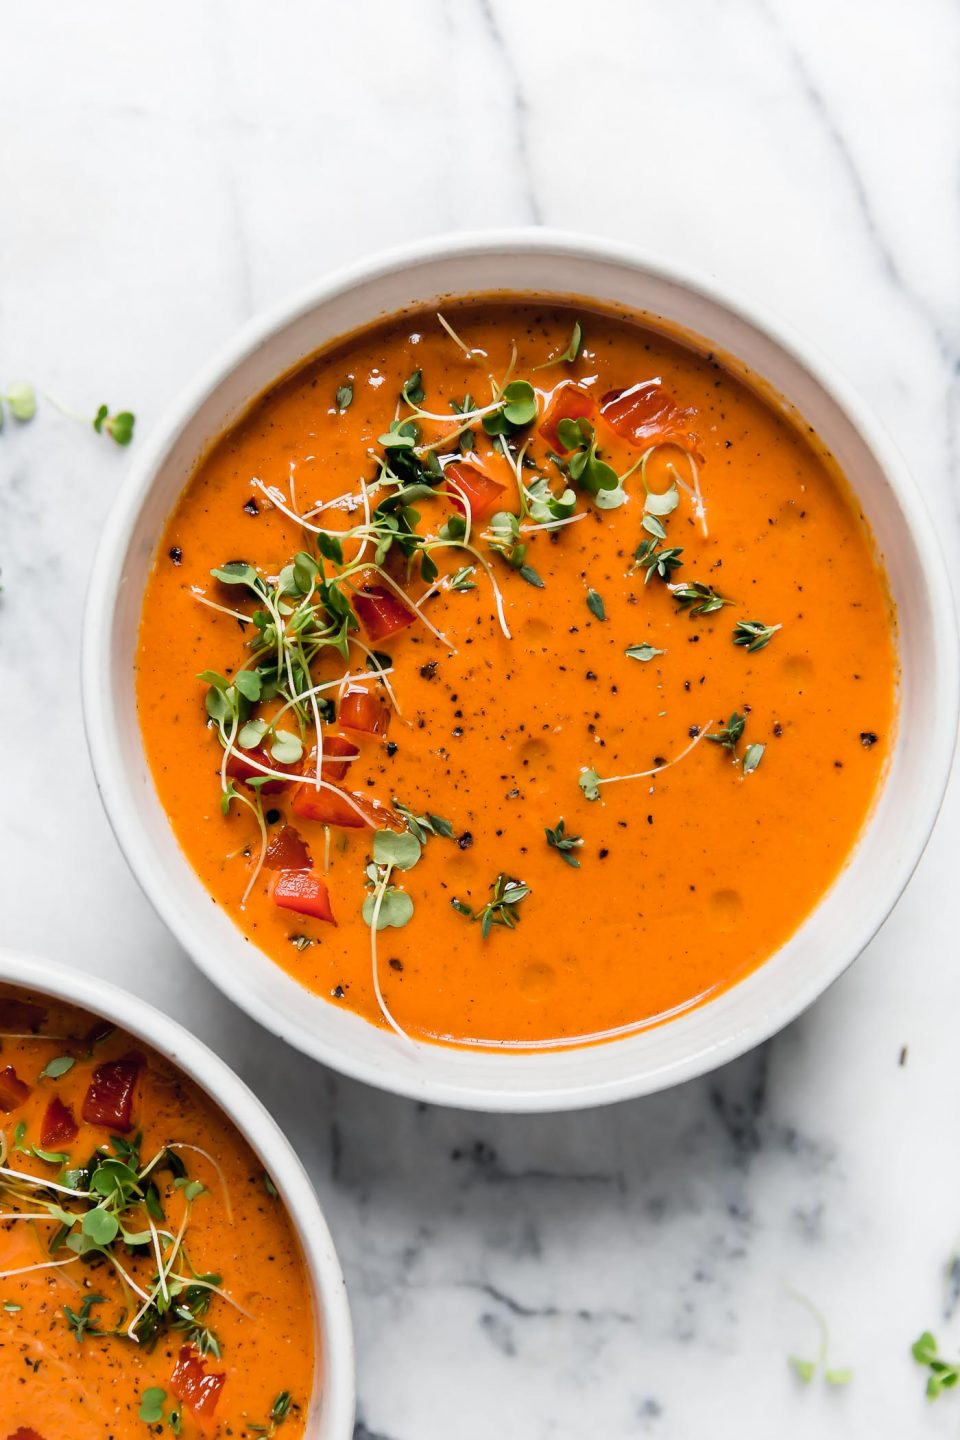 Creamy Roasted Red Pepper soup in a white ceramic bowl, topped with microgreens and cracked black pepper. The bowl is next to a second bowl of soup. They are sitting atop a white marble surface.